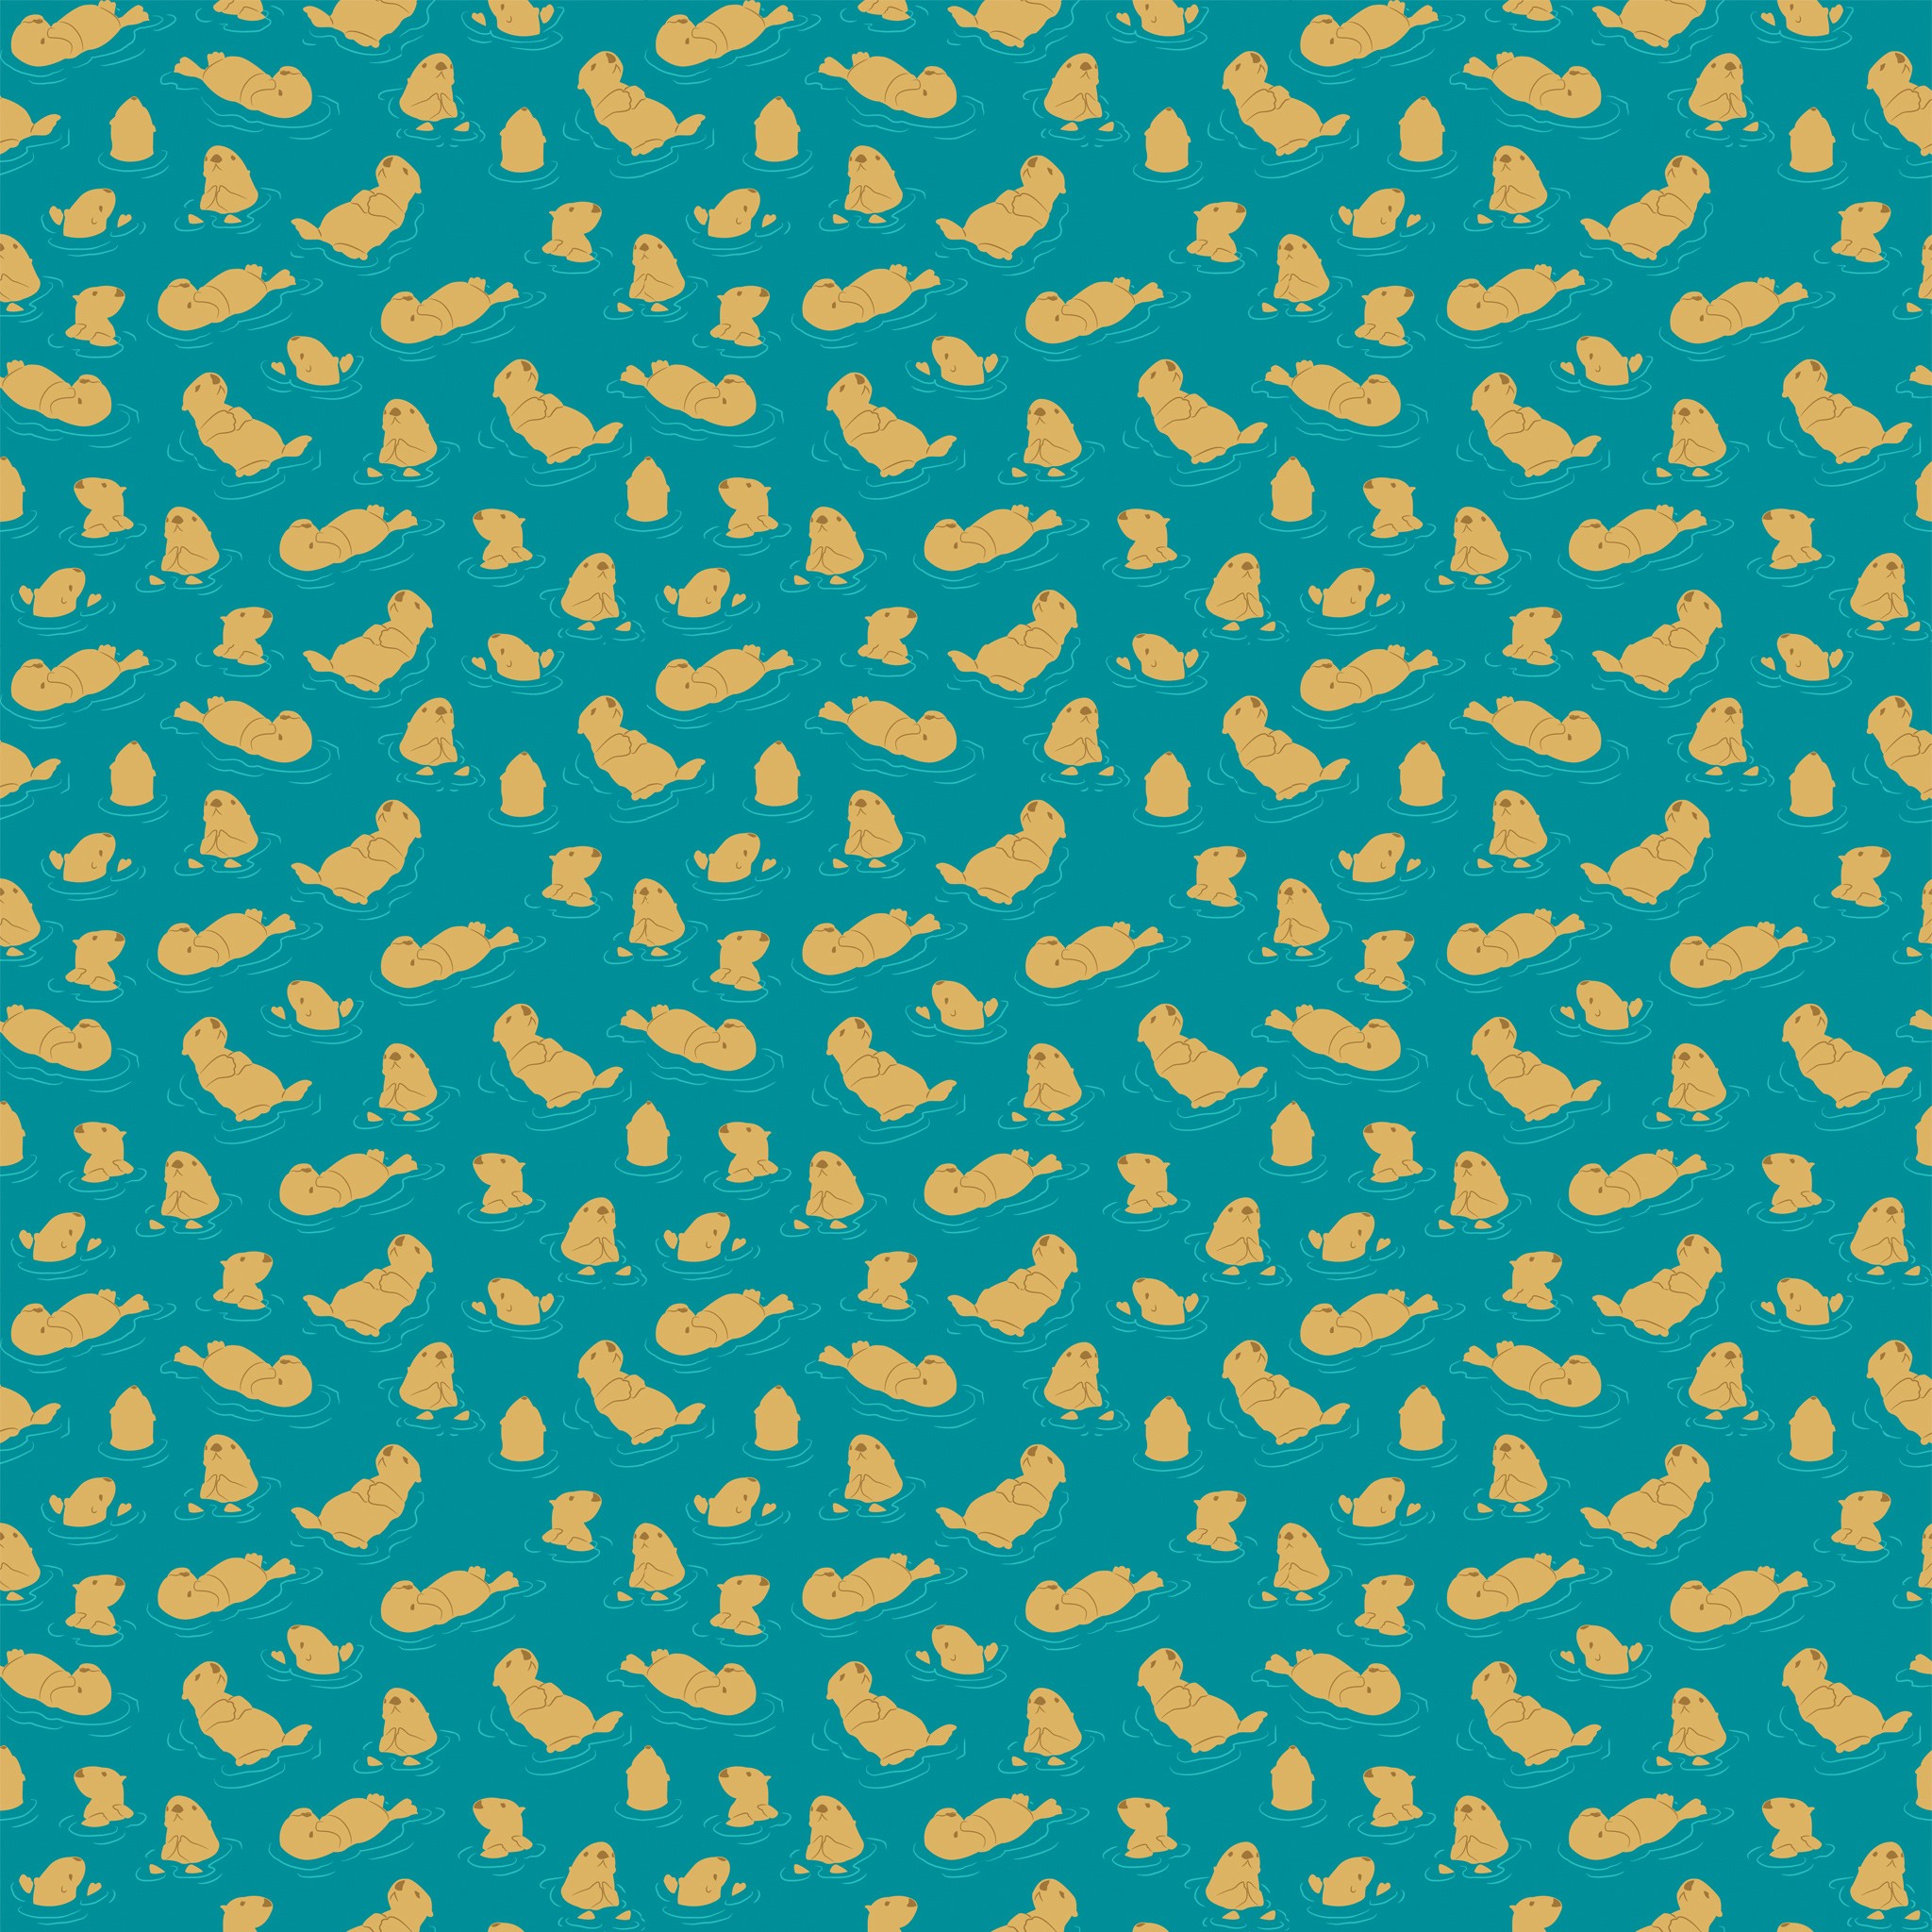 Indie Pattern Backgrounds Tumblr Windows Wallpapers - Primitive Skateboards Iphone Wallpapee , HD Wallpaper & Backgrounds